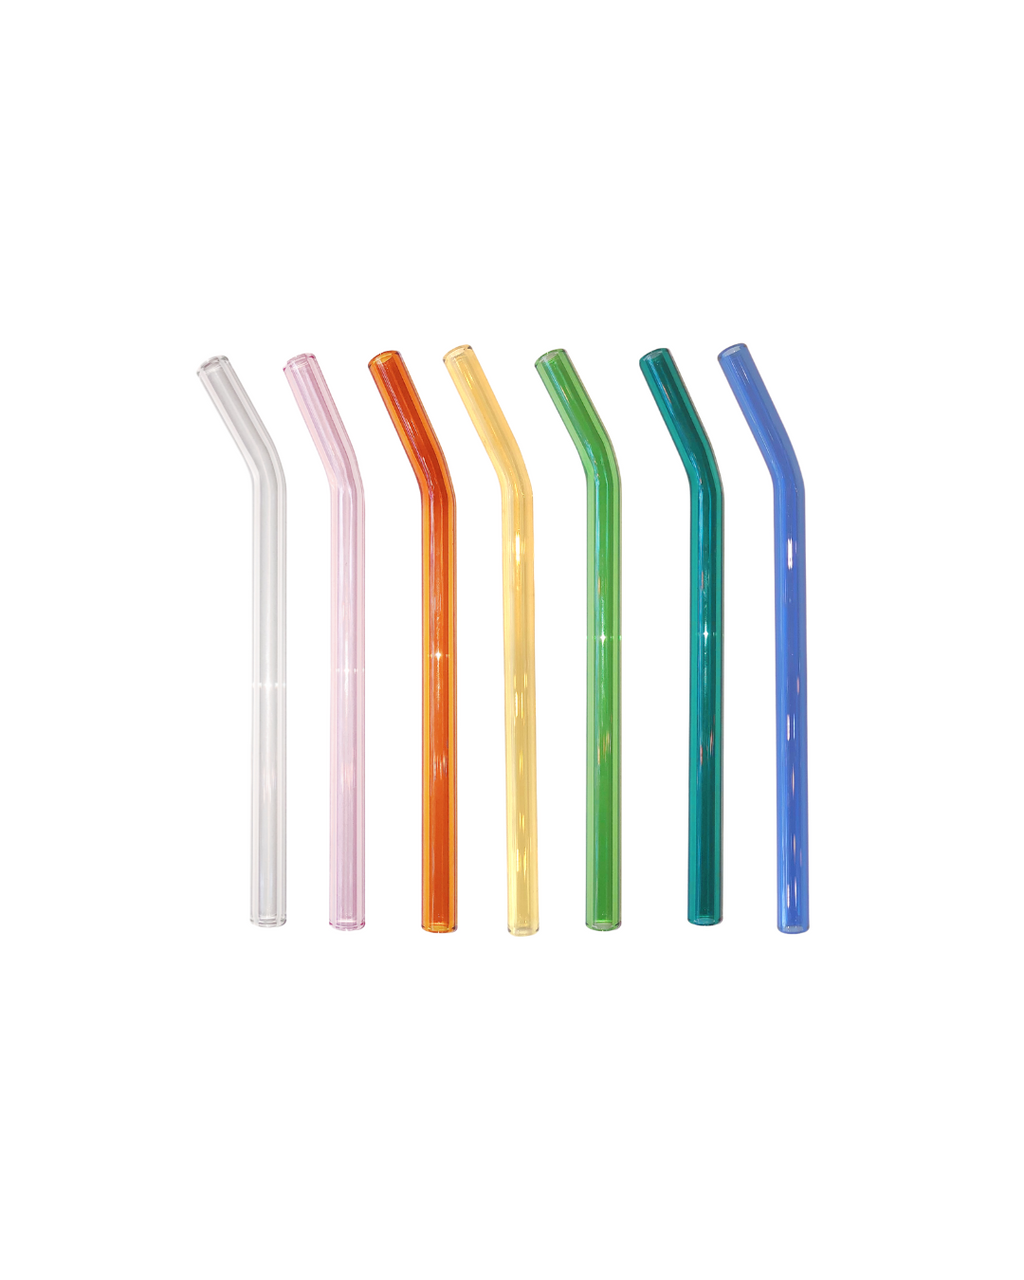 CLASSIC SINGLE GLASS STRAW - all beverages– Simply Straws